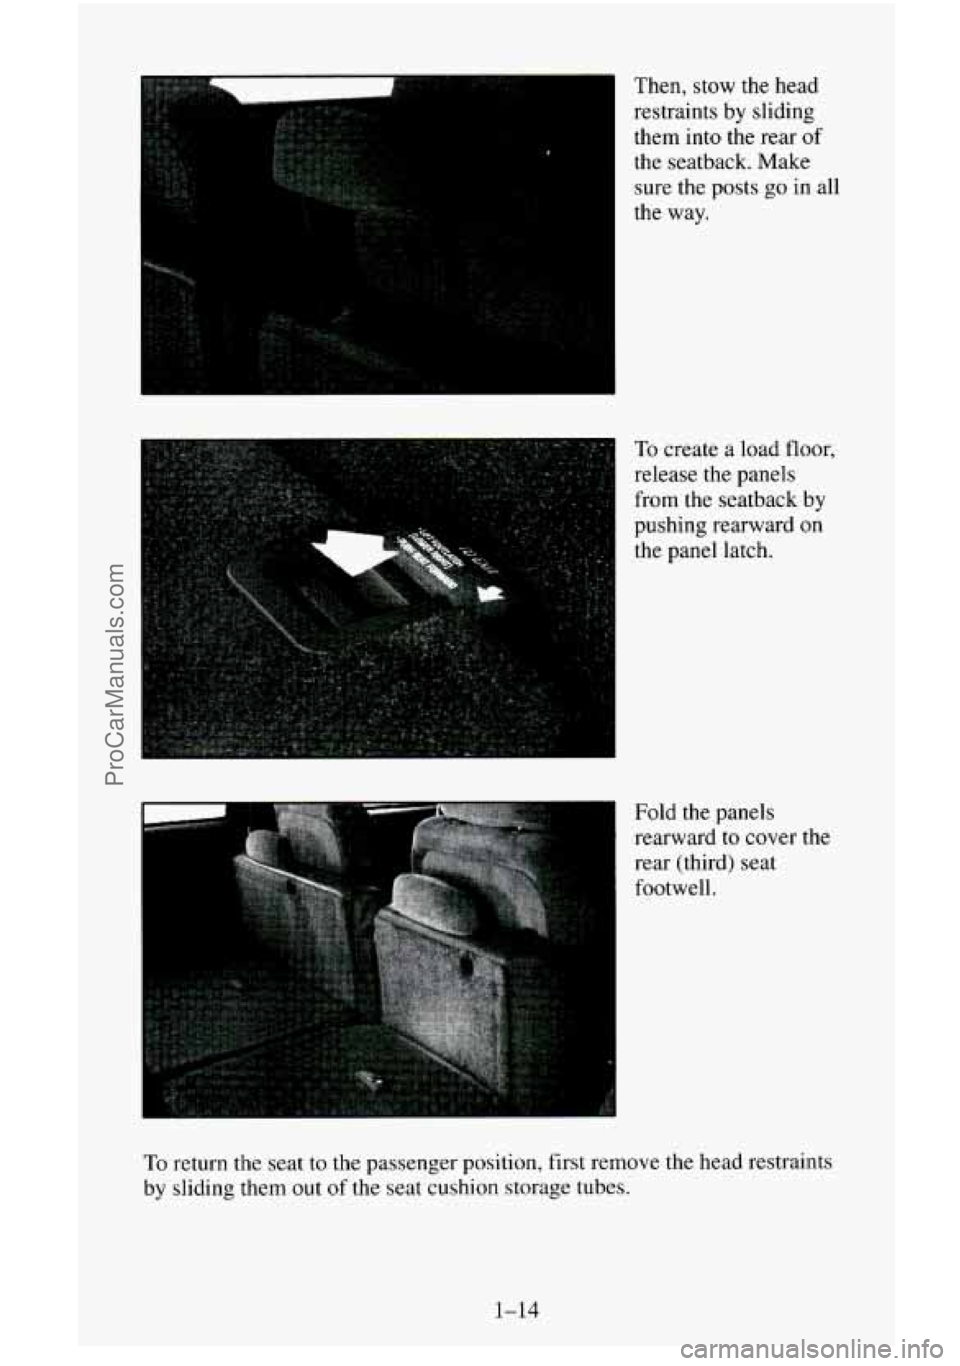 CHEVROLET SUBURBAN 1996 Owners Manual , 
Then, stow the head restraints 
by sliding 
them  into the rear 
of 
the seatback. Make 
sure  the posts  go in all 
the  way. 
To create a load floor, 
release the panels 
from the seatback  by 
p